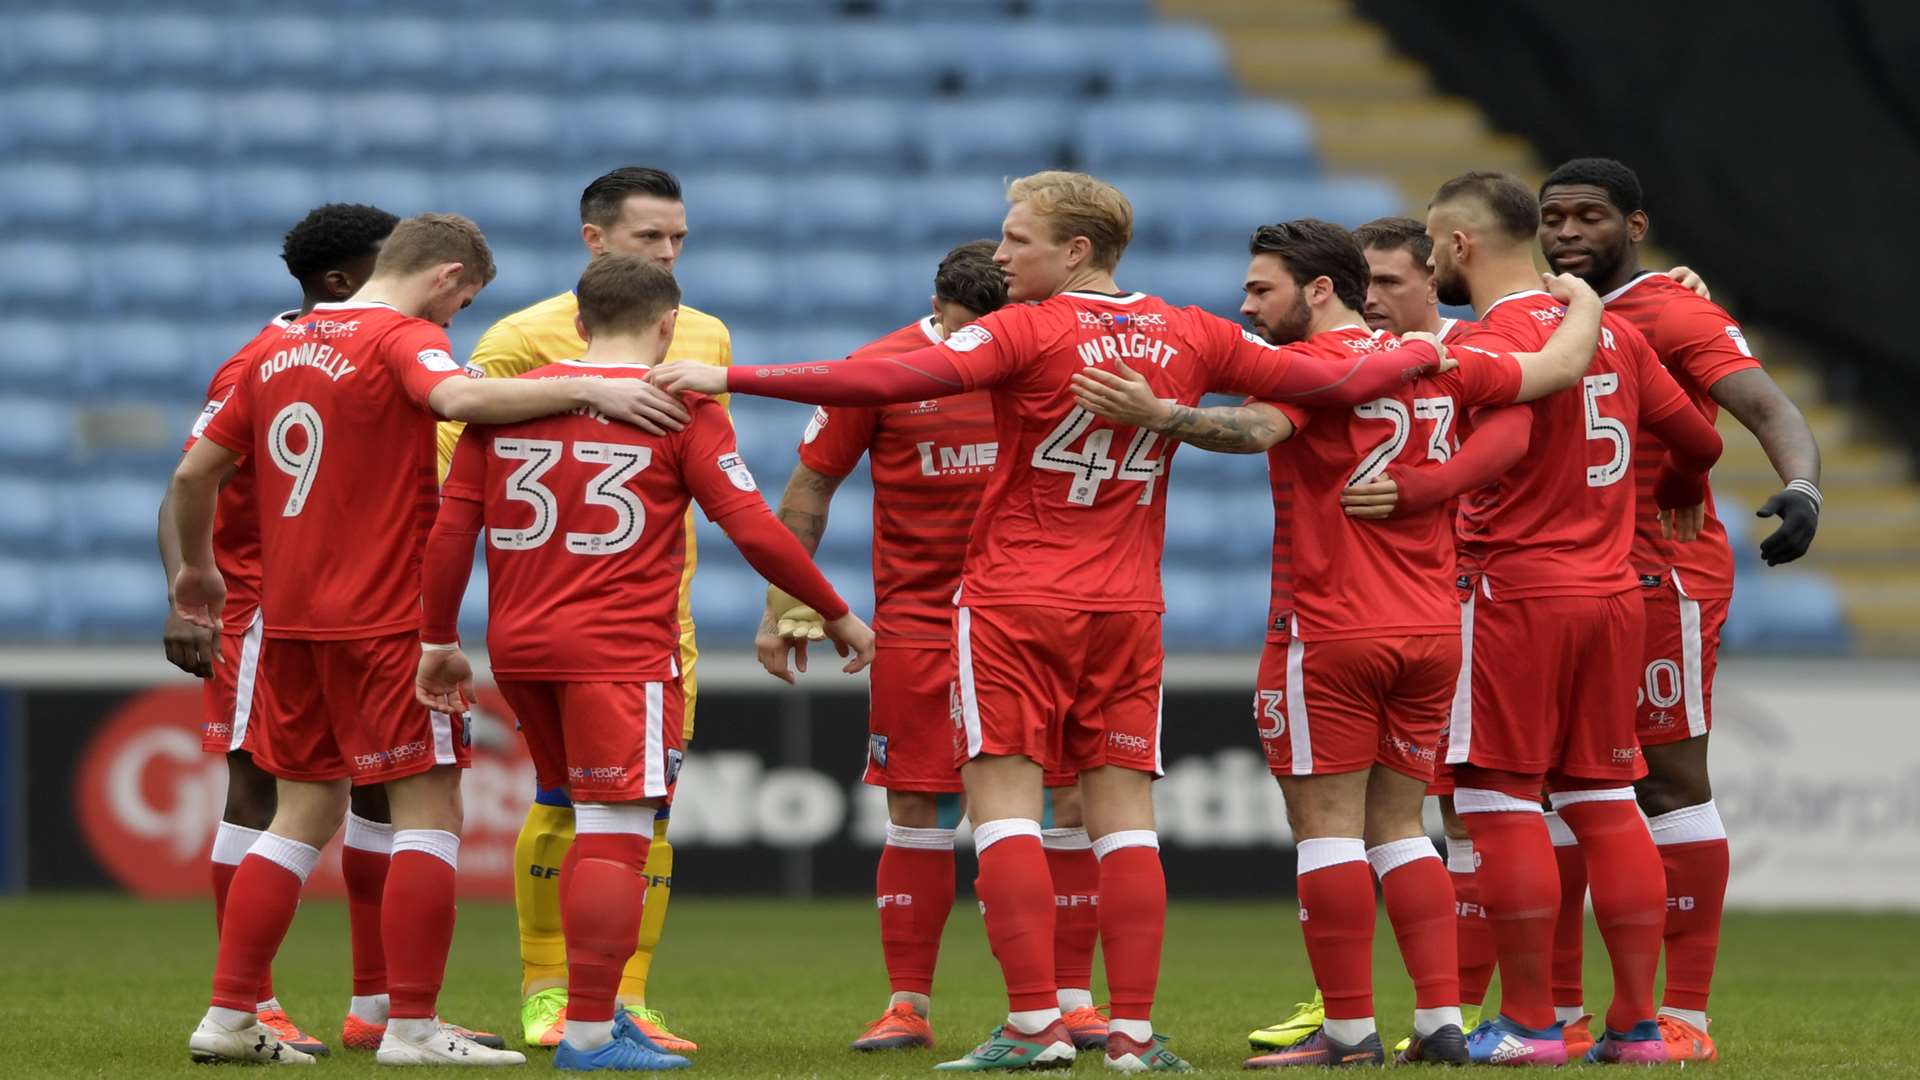 Wright still has his say in the pre-match huddle Picture: Barry Goodwin